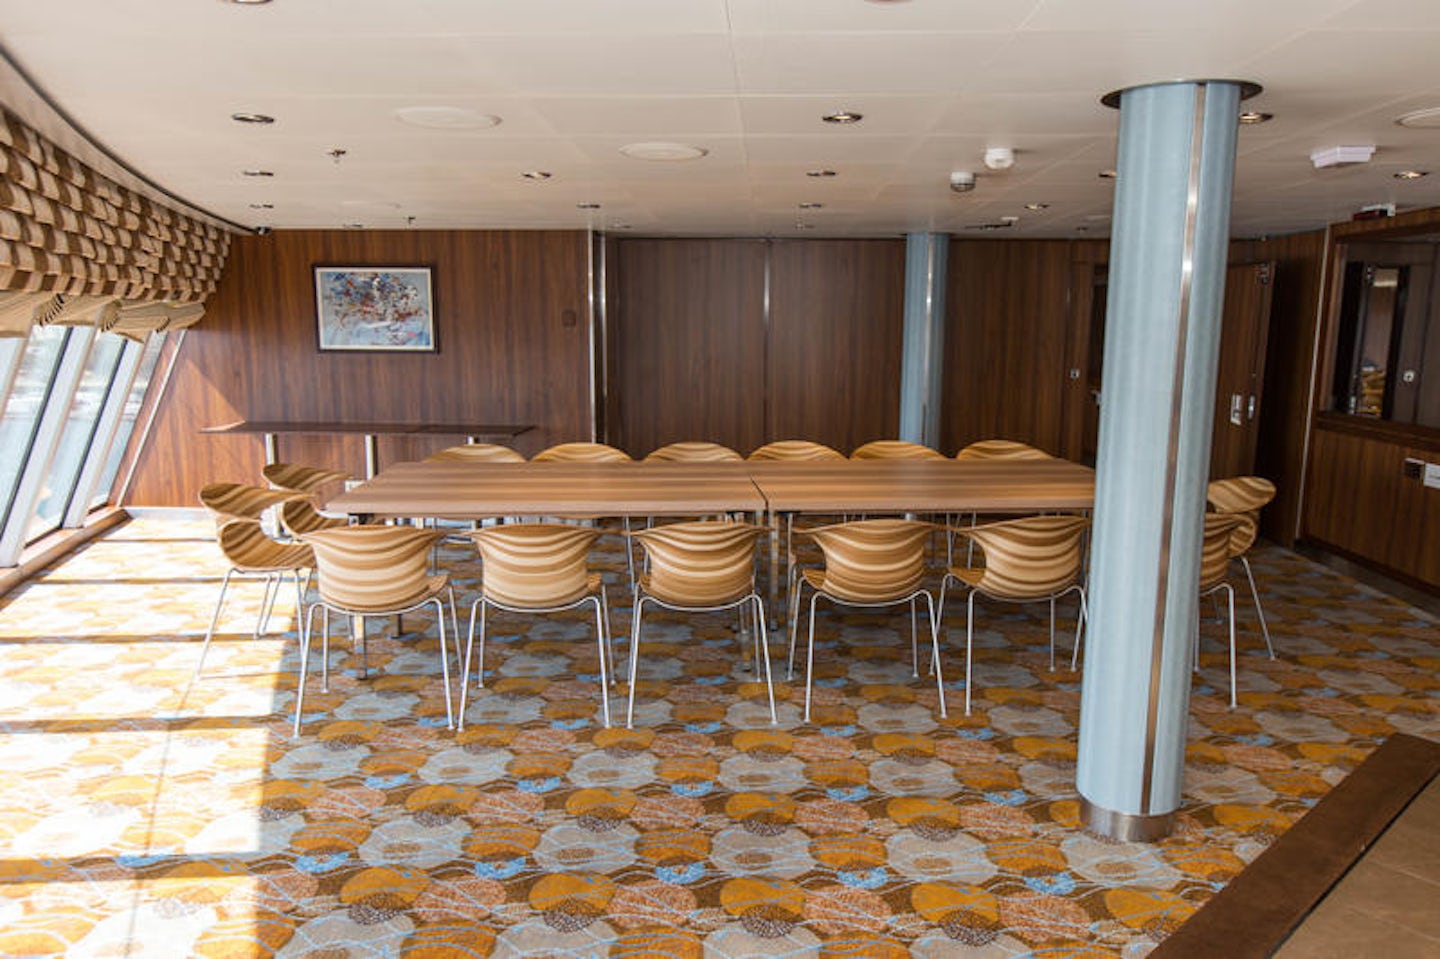 Conference Center on Anthem of the Seas